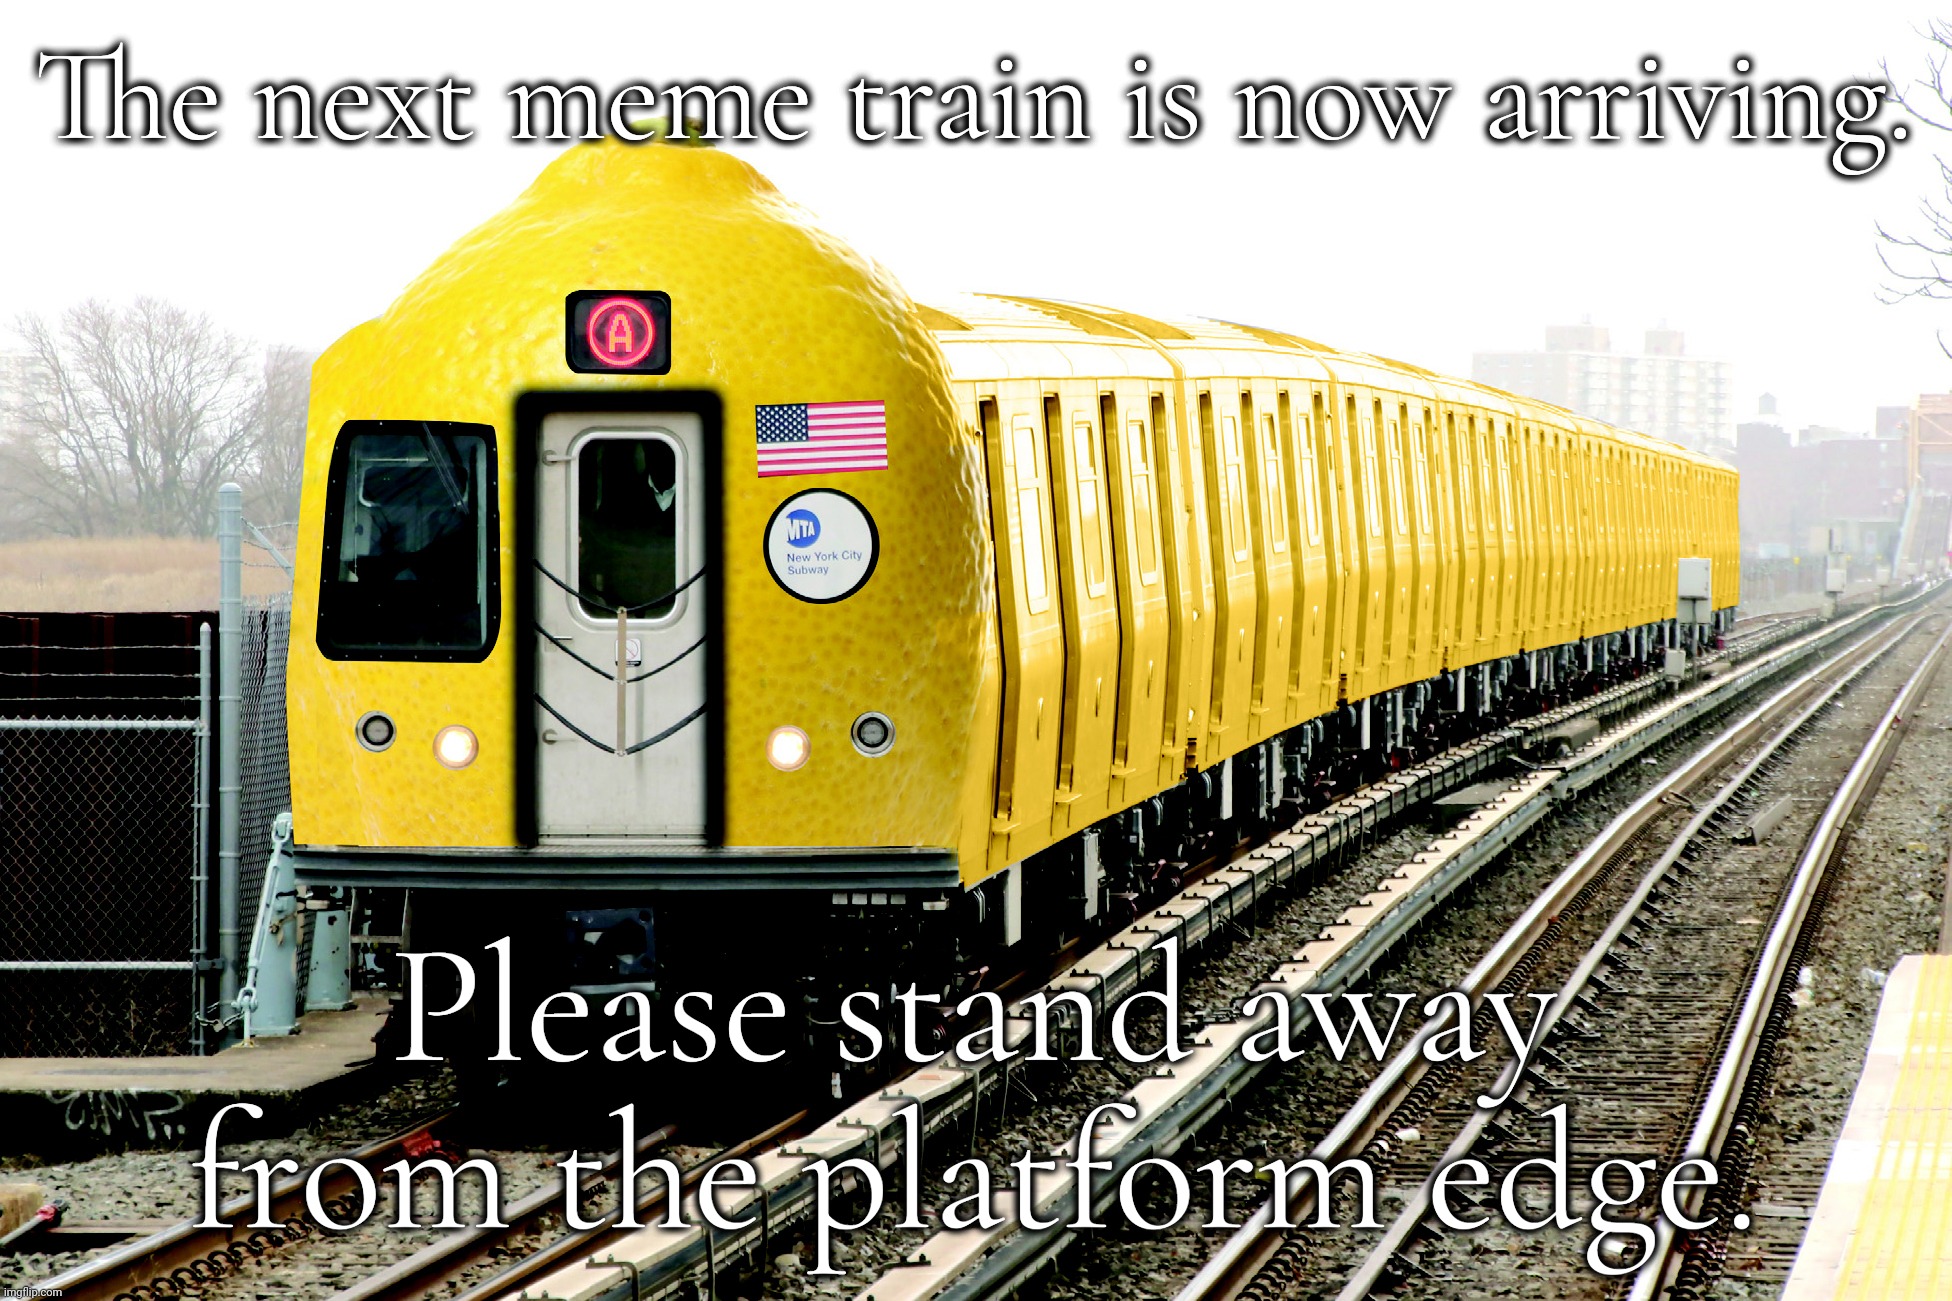 R179 Lemon | The next meme train is now arriving. Please stand away from the platform edge. | image tagged in r179 lemon,mta,new york | made w/ Imgflip meme maker